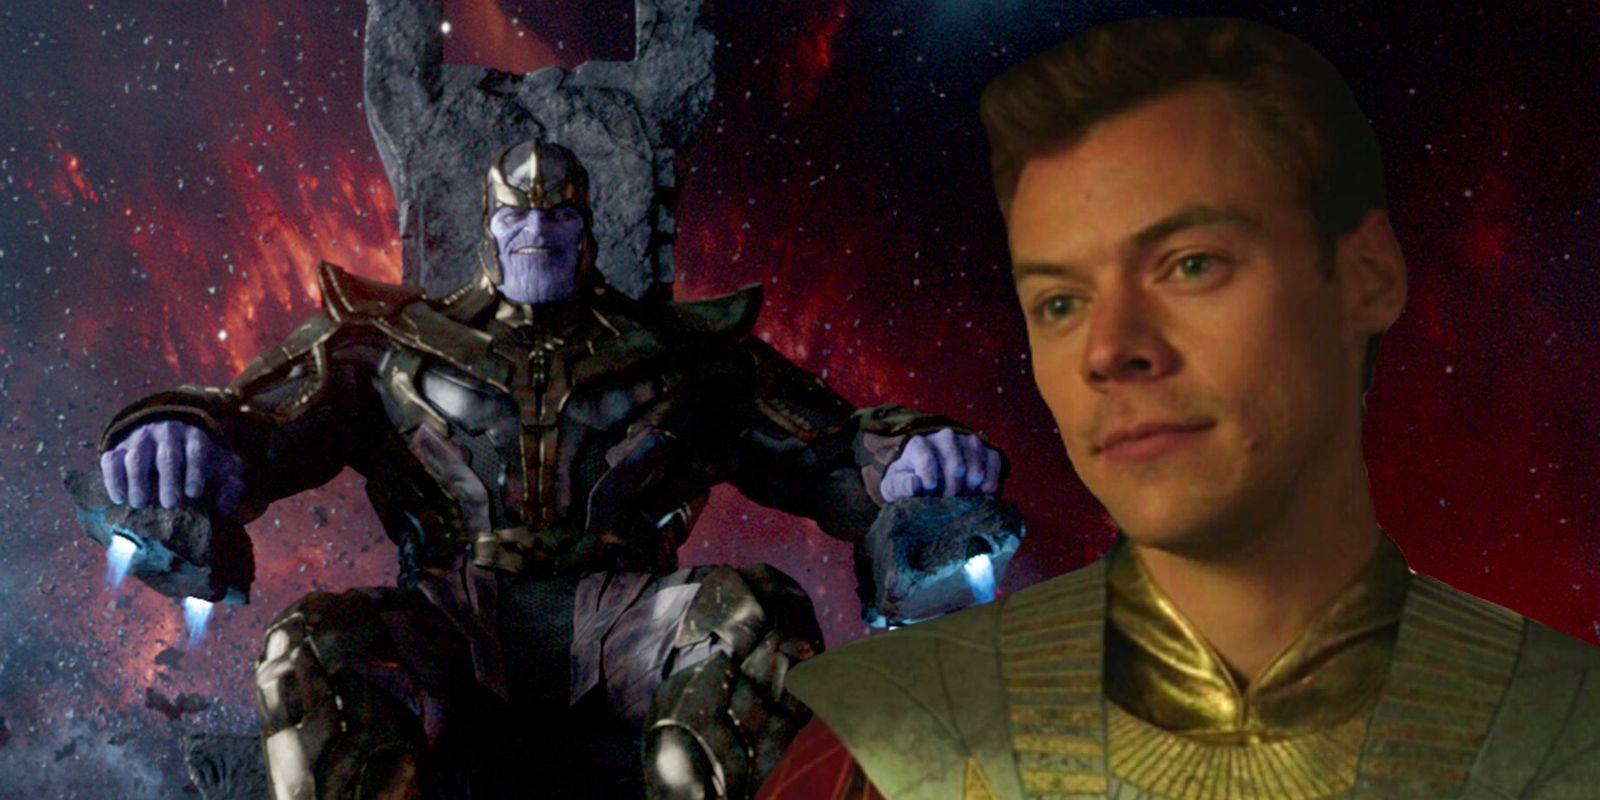 Eternals': Thanos' Hot Brother Joins the MCU. What to Know About Eros